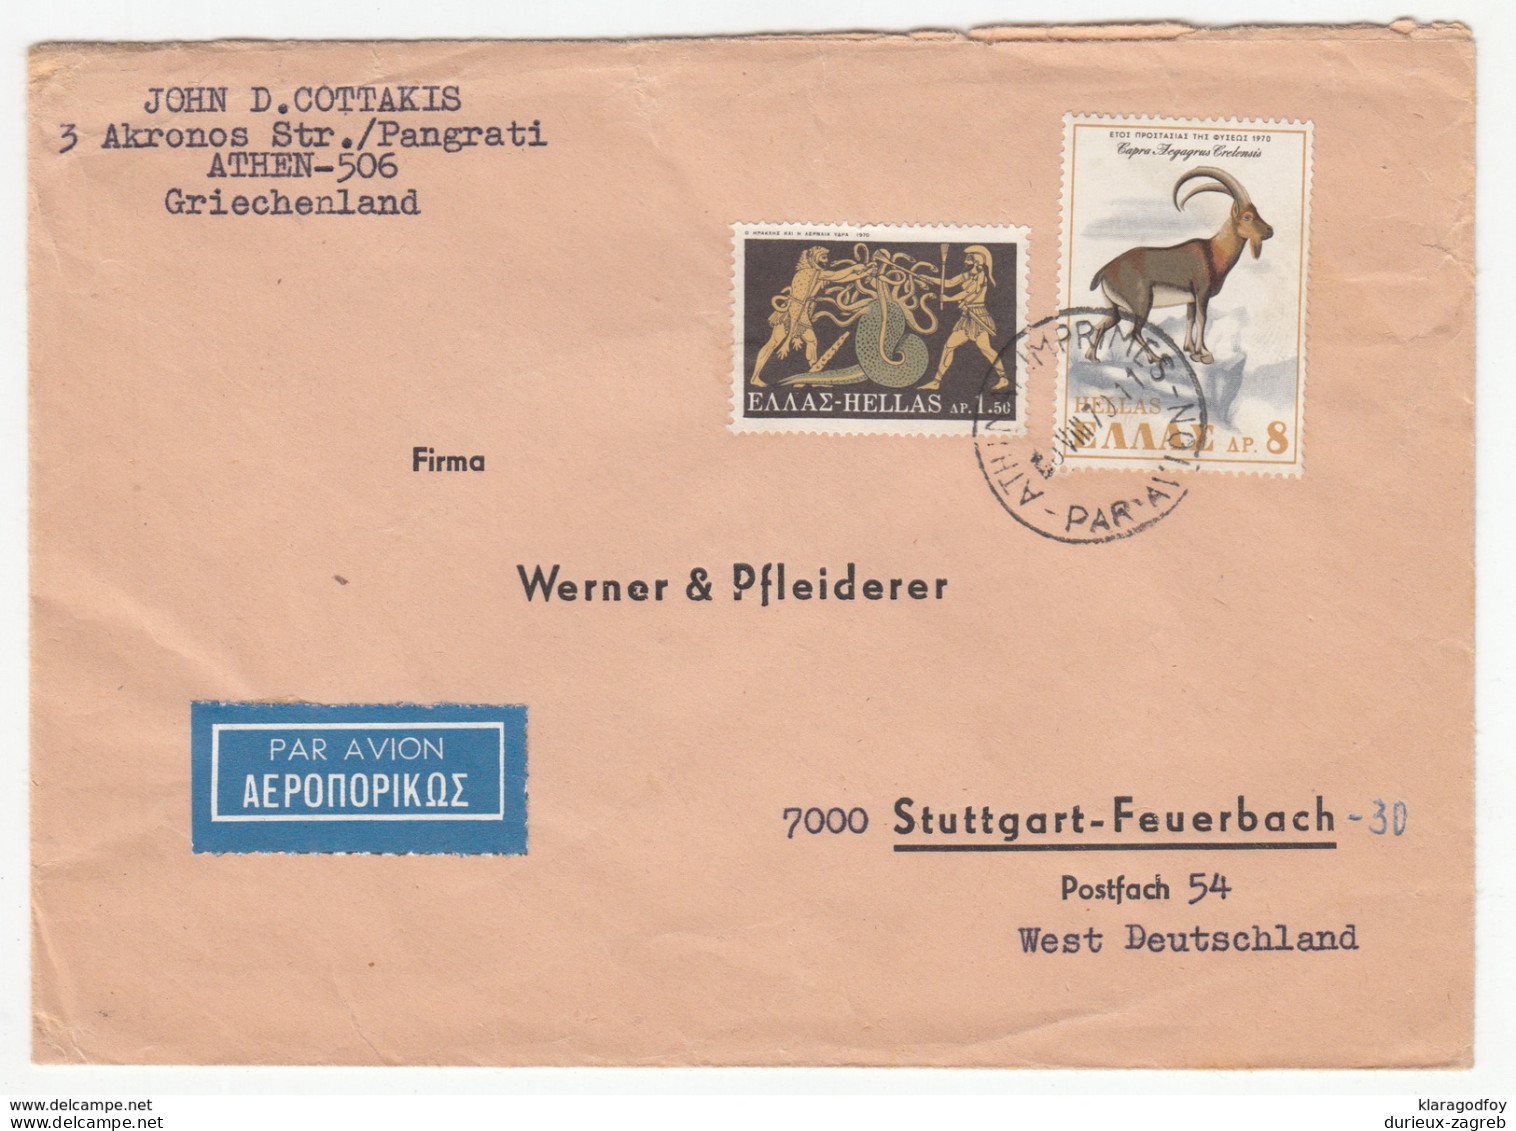 Greece, Werner & Pfleiderer Company Letter Cover Airmail Travelled 1970 B171025 - Covers & Documents